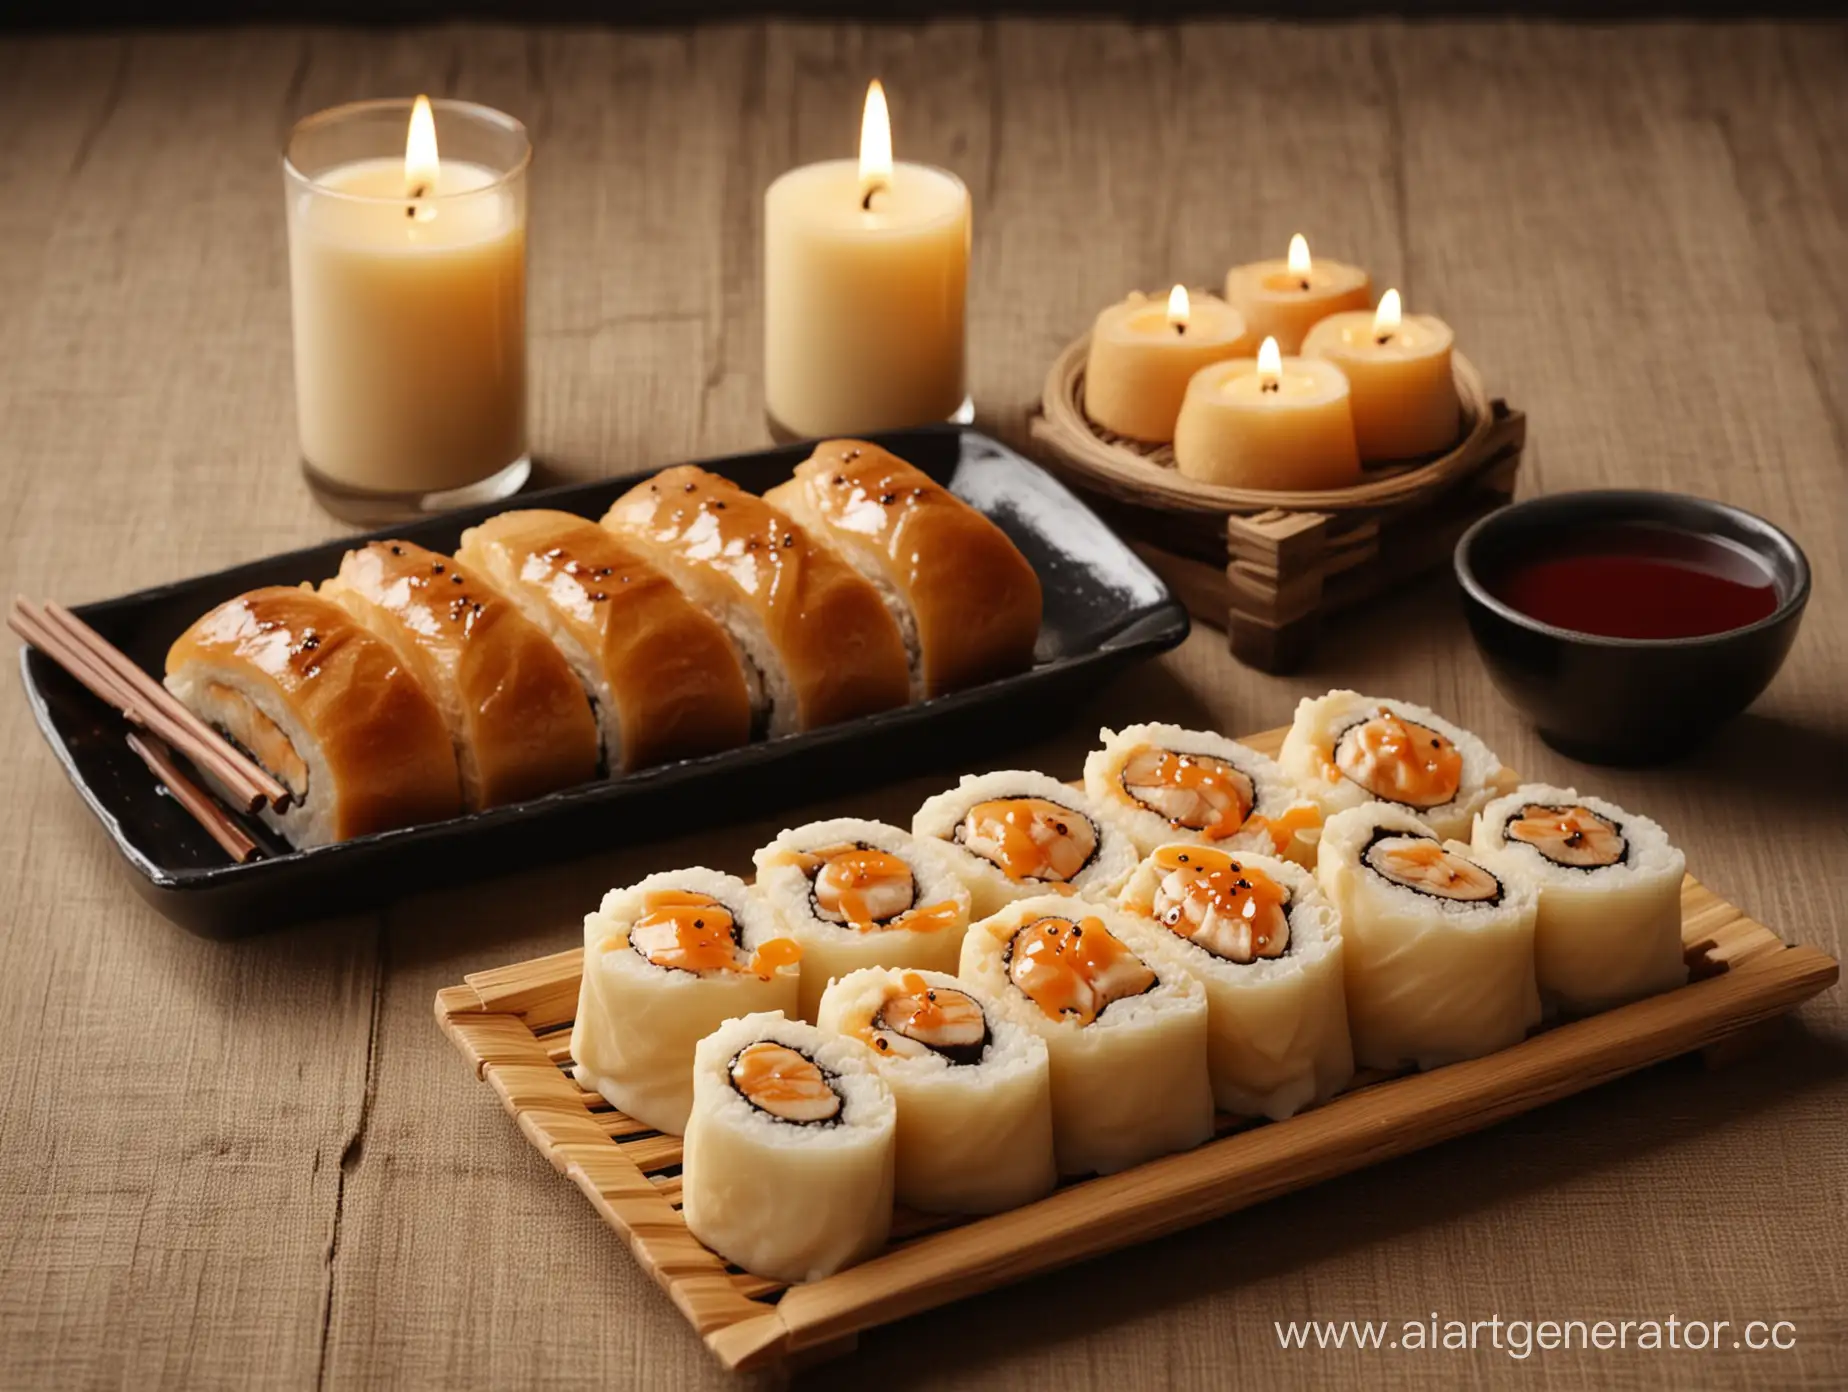 Delicious-Sushi-Rolls-with-Ambient-Candlelight-and-Soy-Sauce